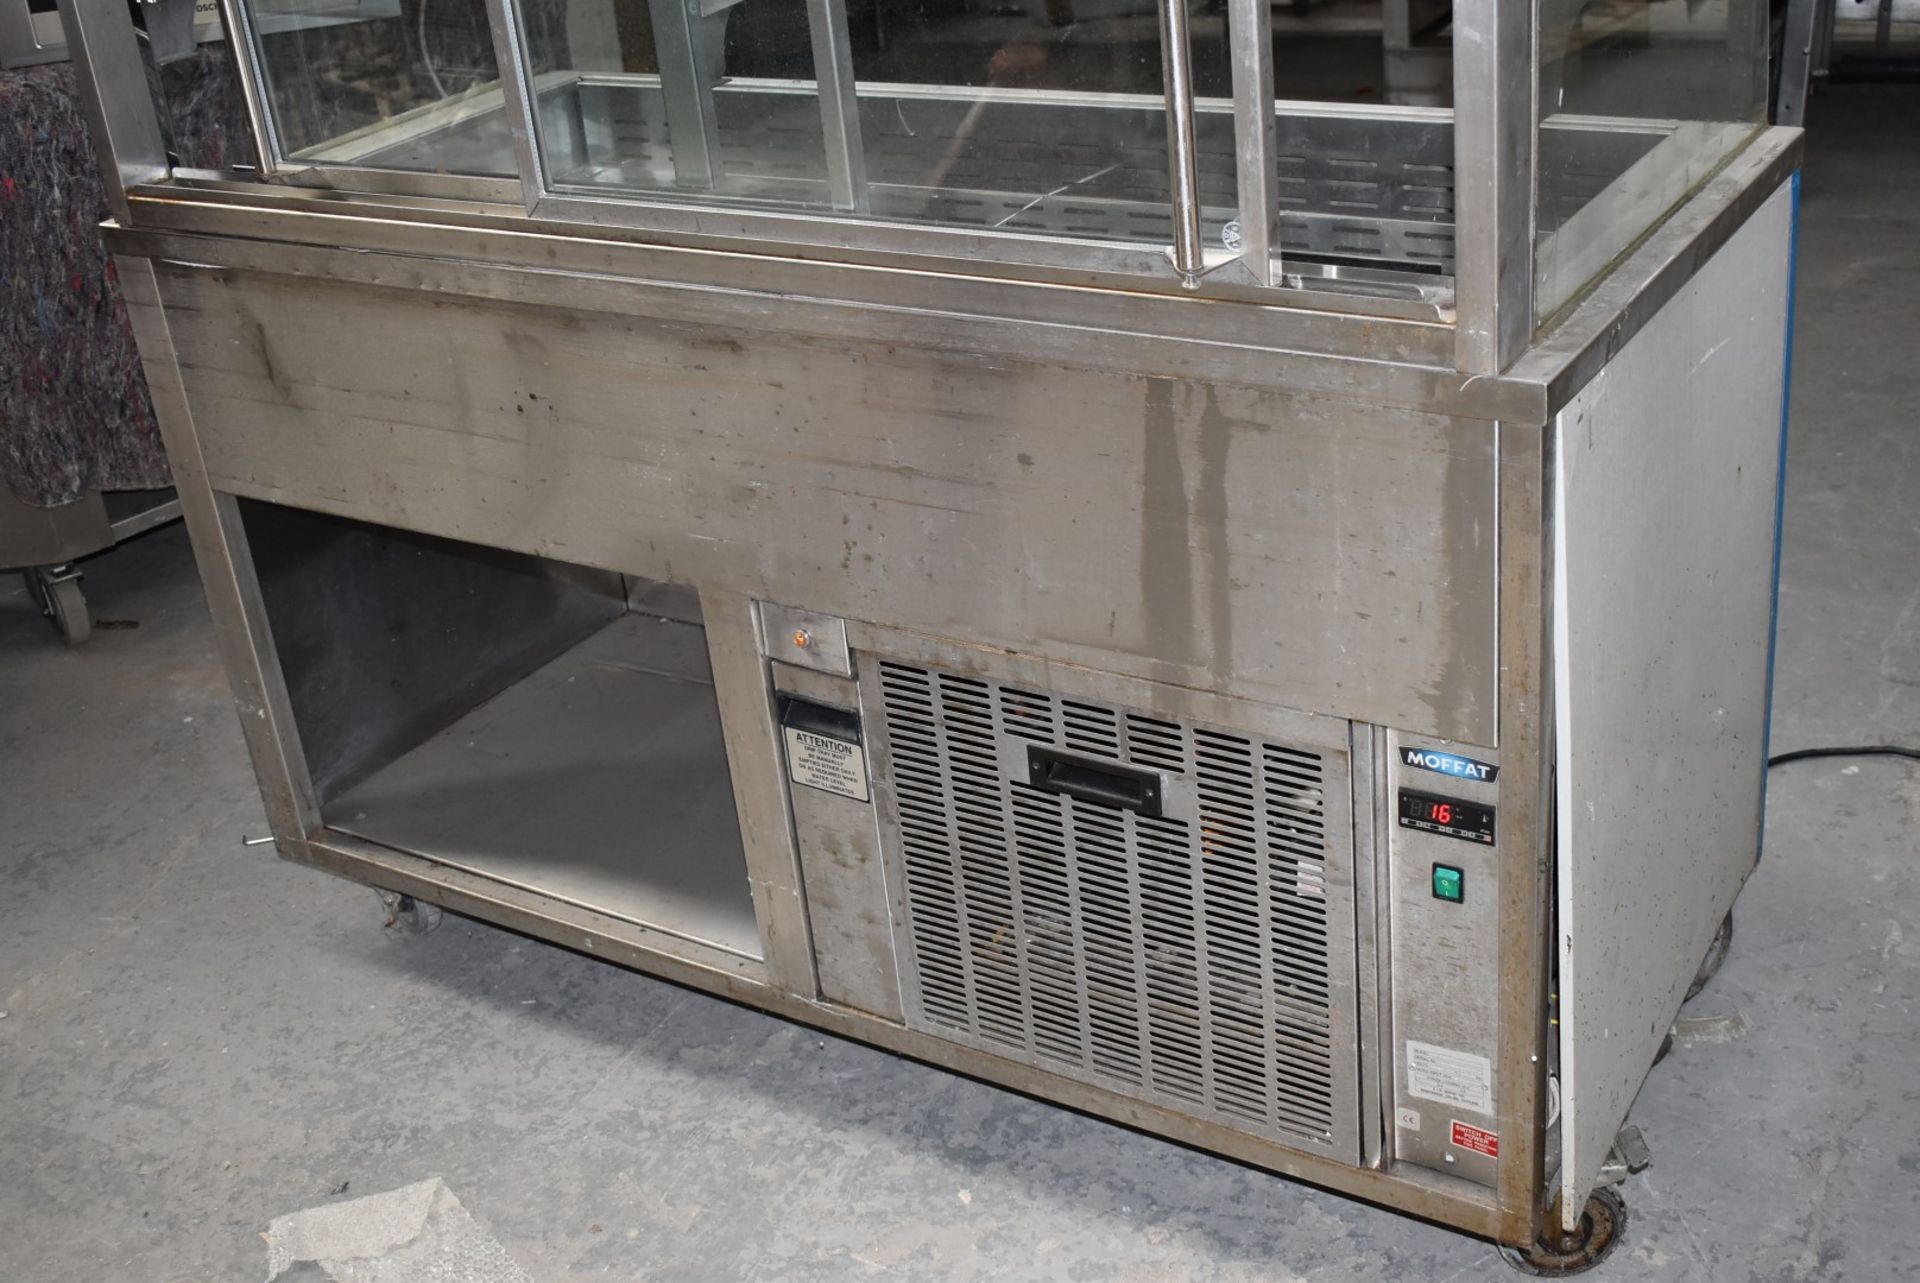 1 x Moffat Self Serve Refrigerated Food Chiller - 240v - Dimensions: H160 x W150 x D64 cms - Image 3 of 8